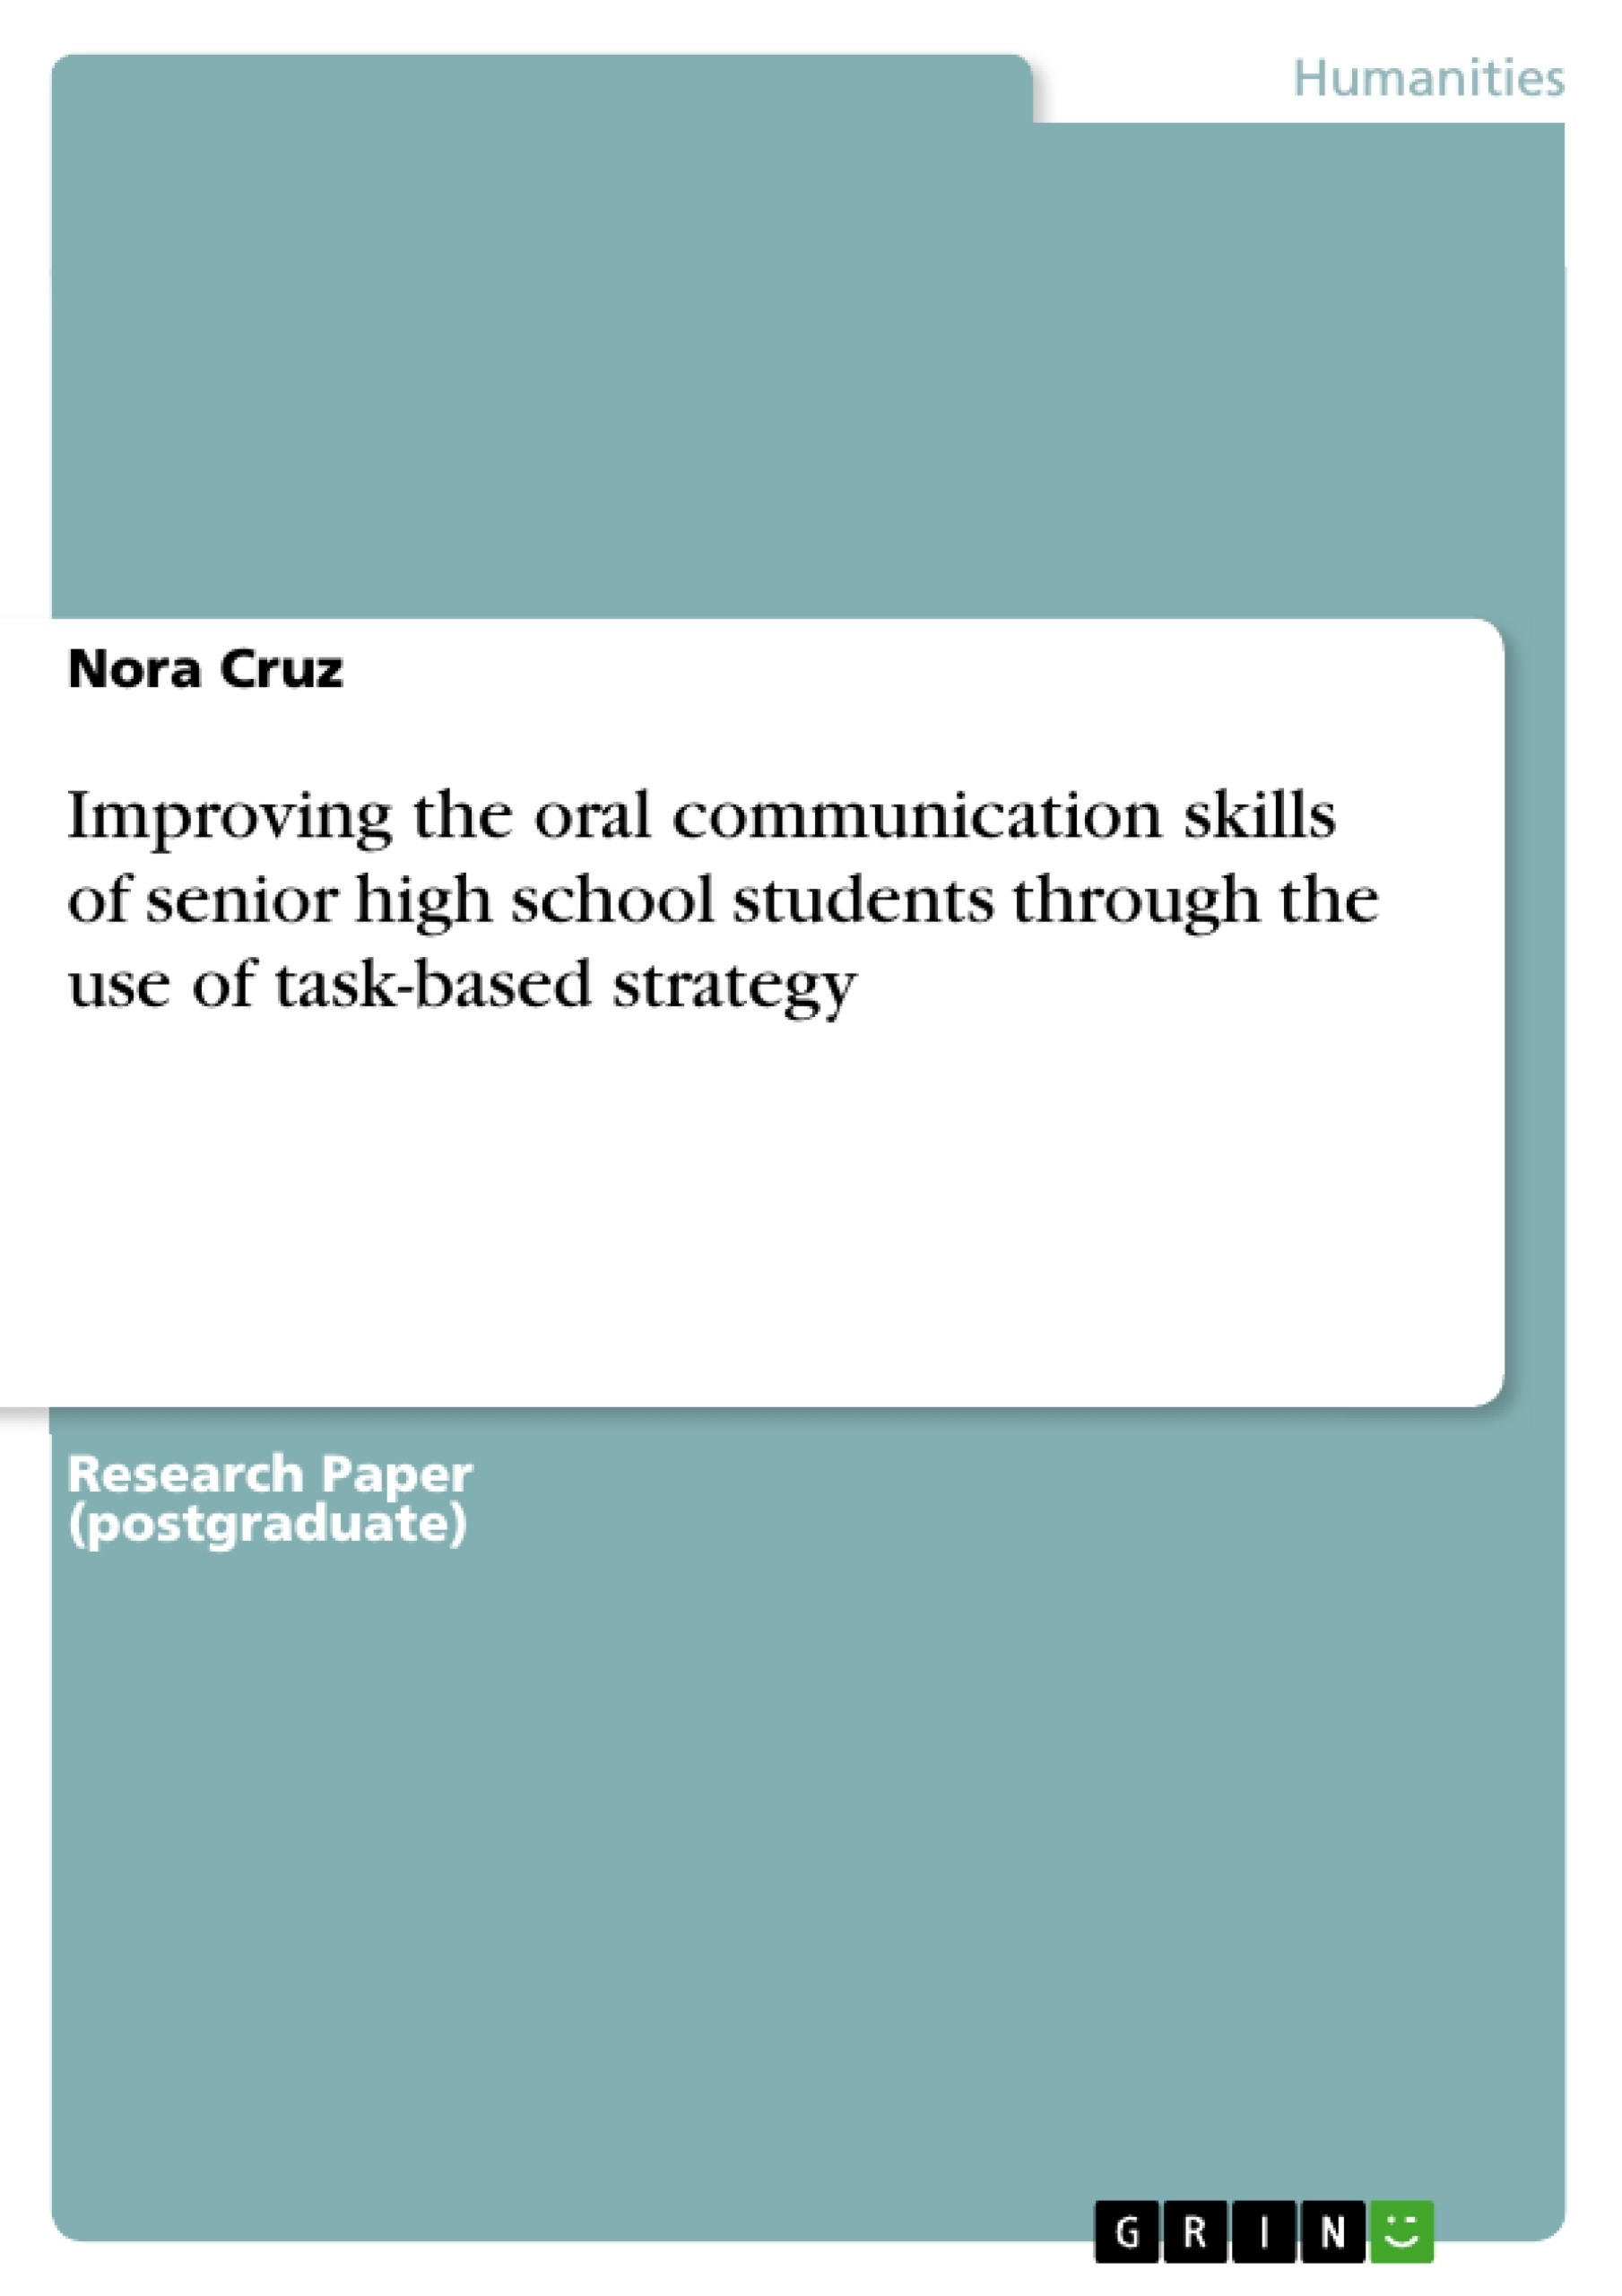 Title: Improving the oral communication skills of senior high school students through the use of task-based strategy